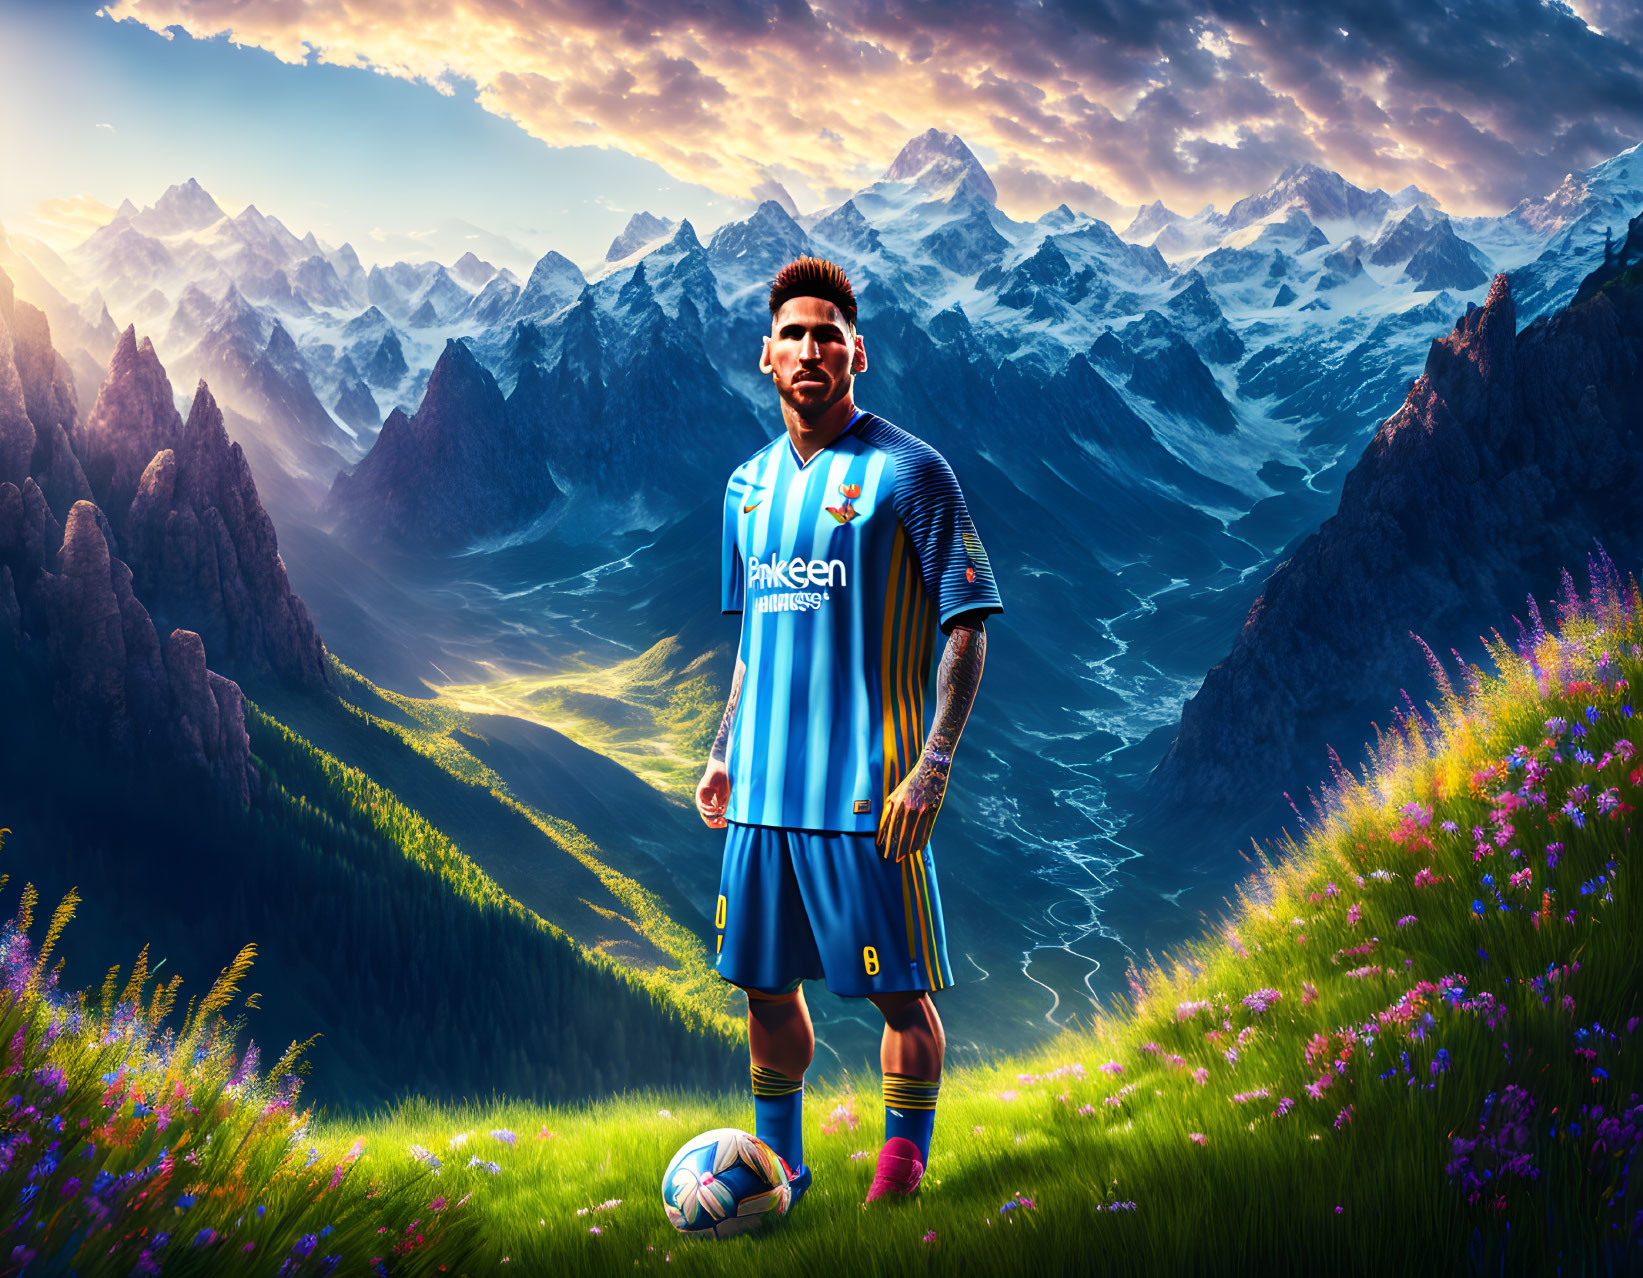 Soccer player on vibrant green field with snow-capped mountains at sunset